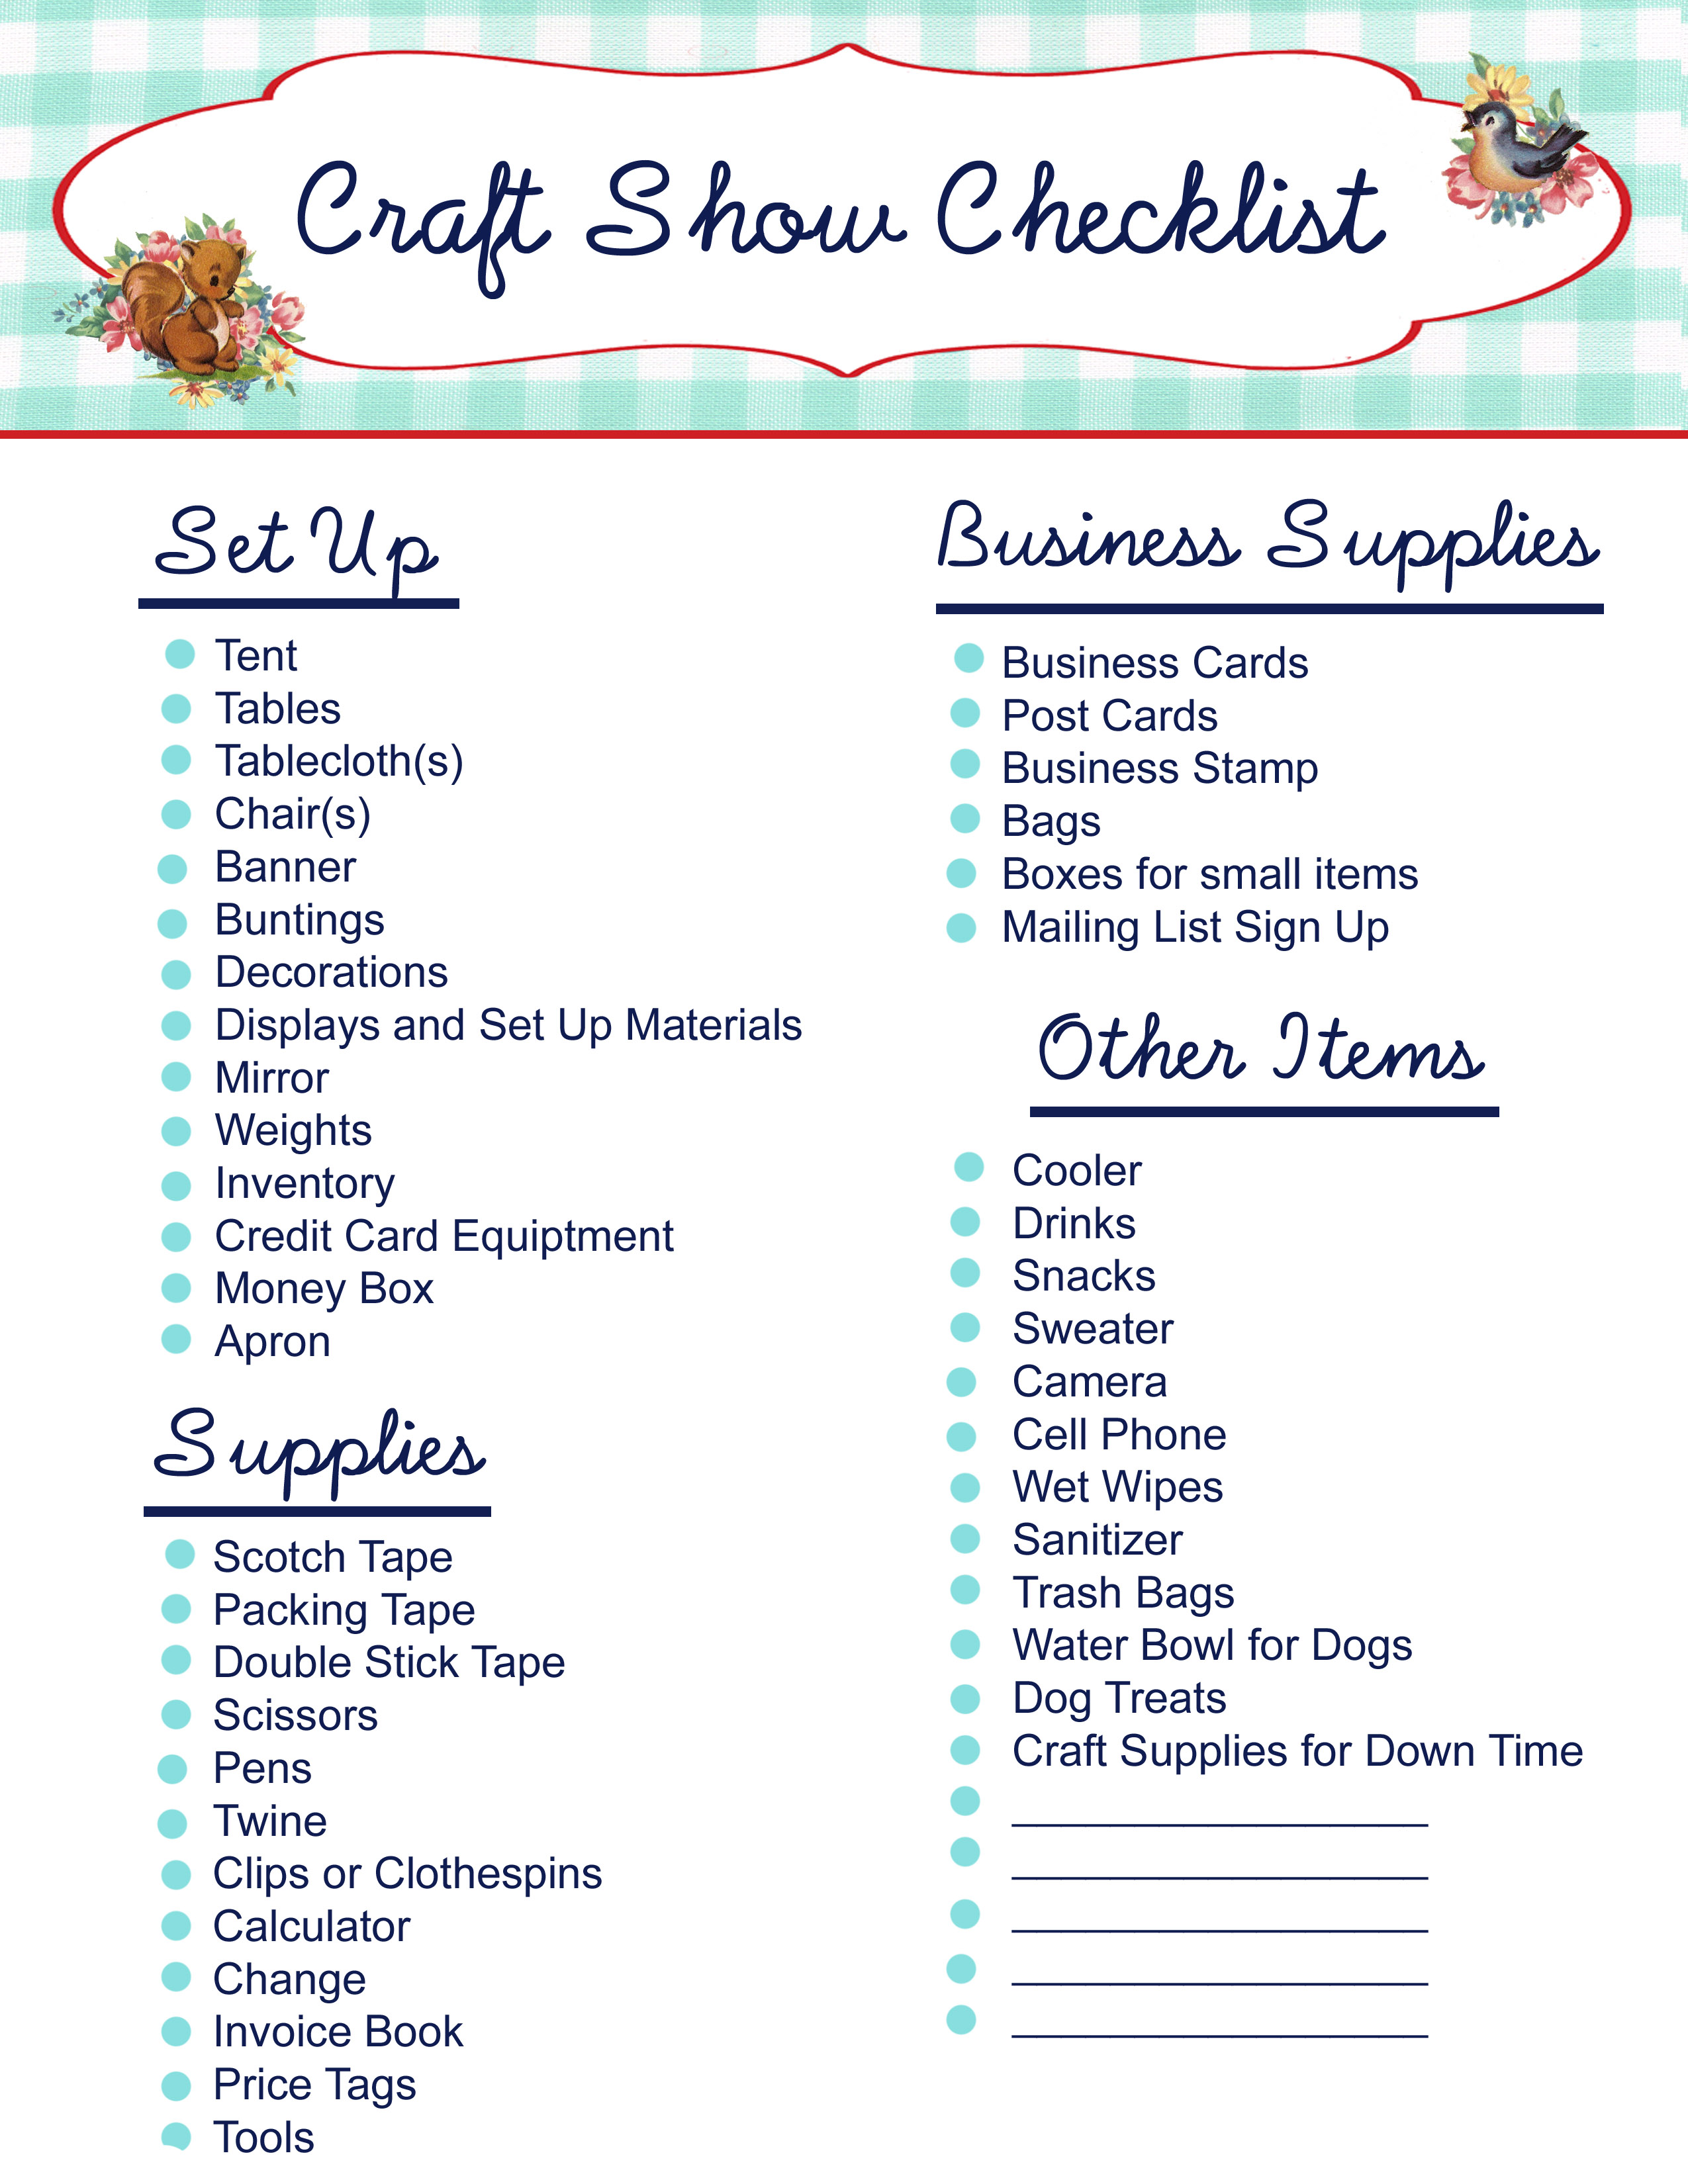 Free Printable- Craft Show Checklist - My So Called Crafty Life